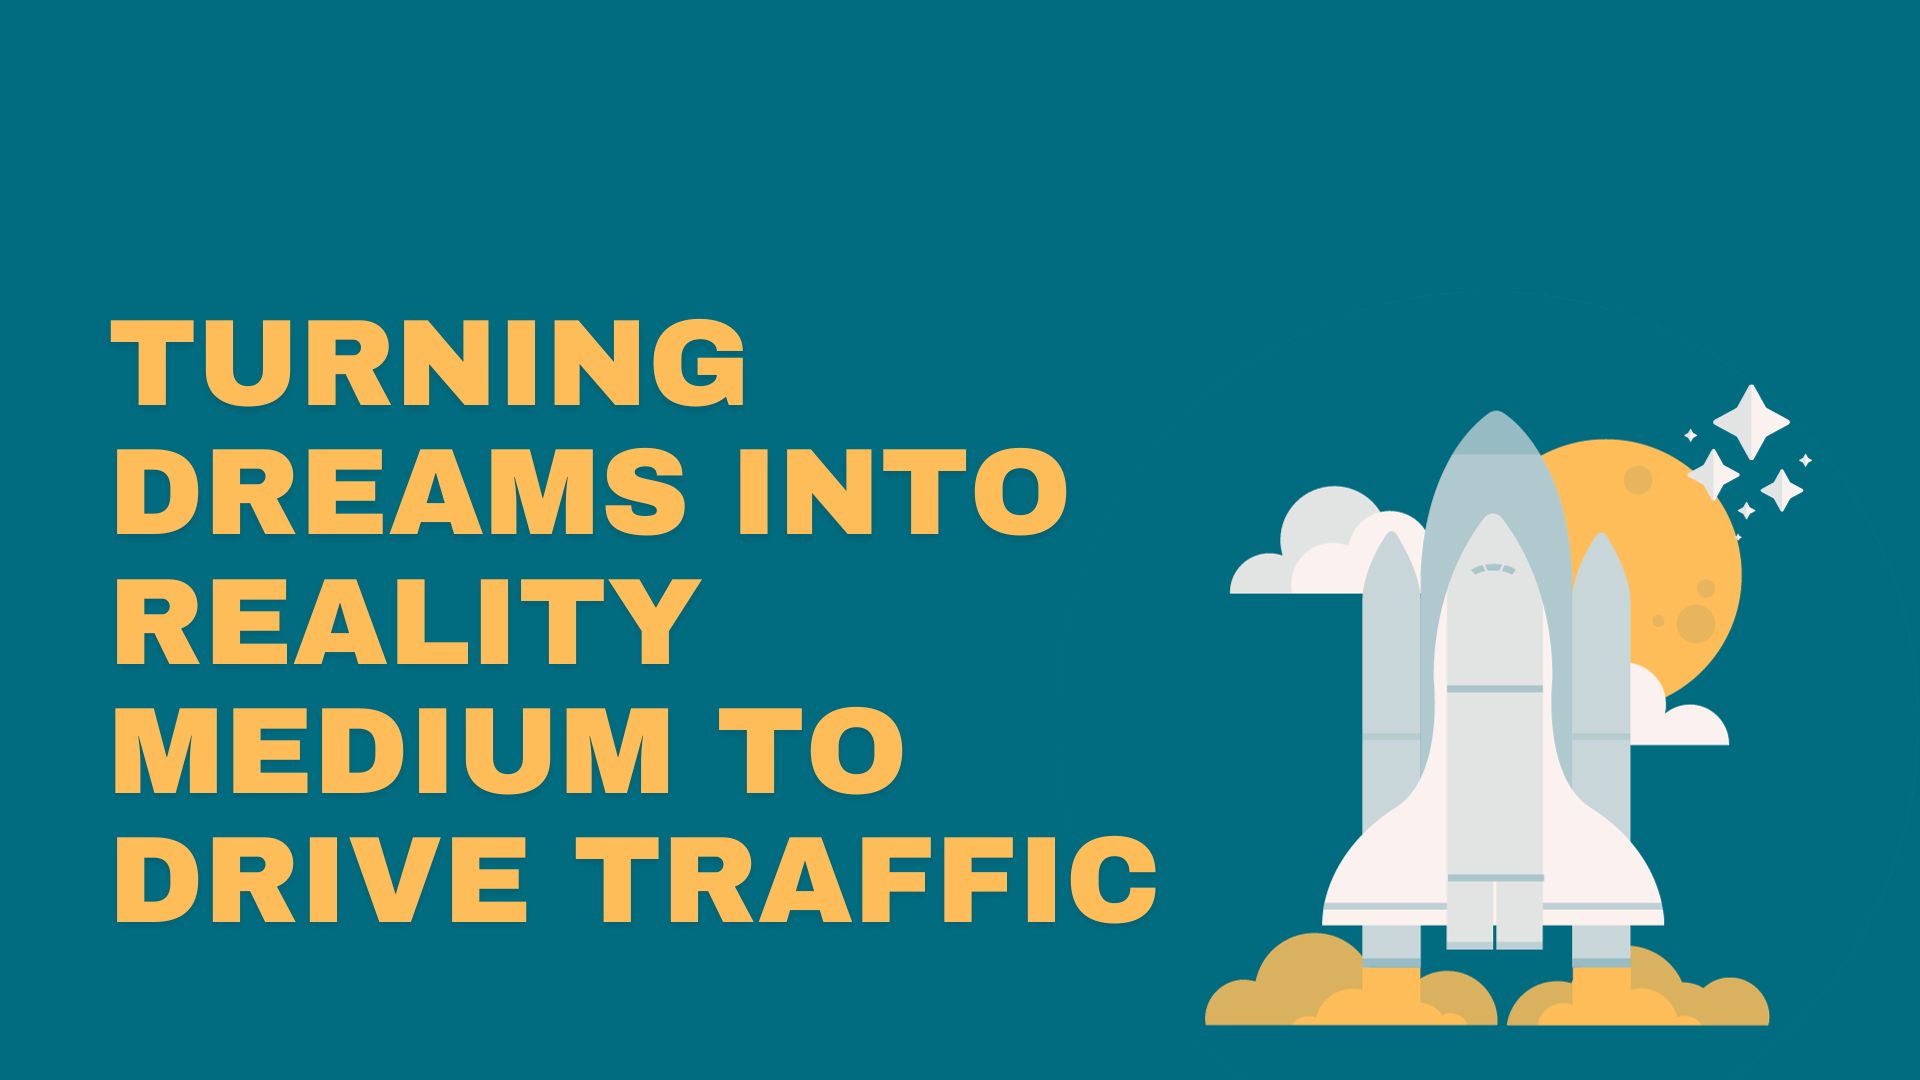 Turning Dreams into Reality Medium to drive traffic